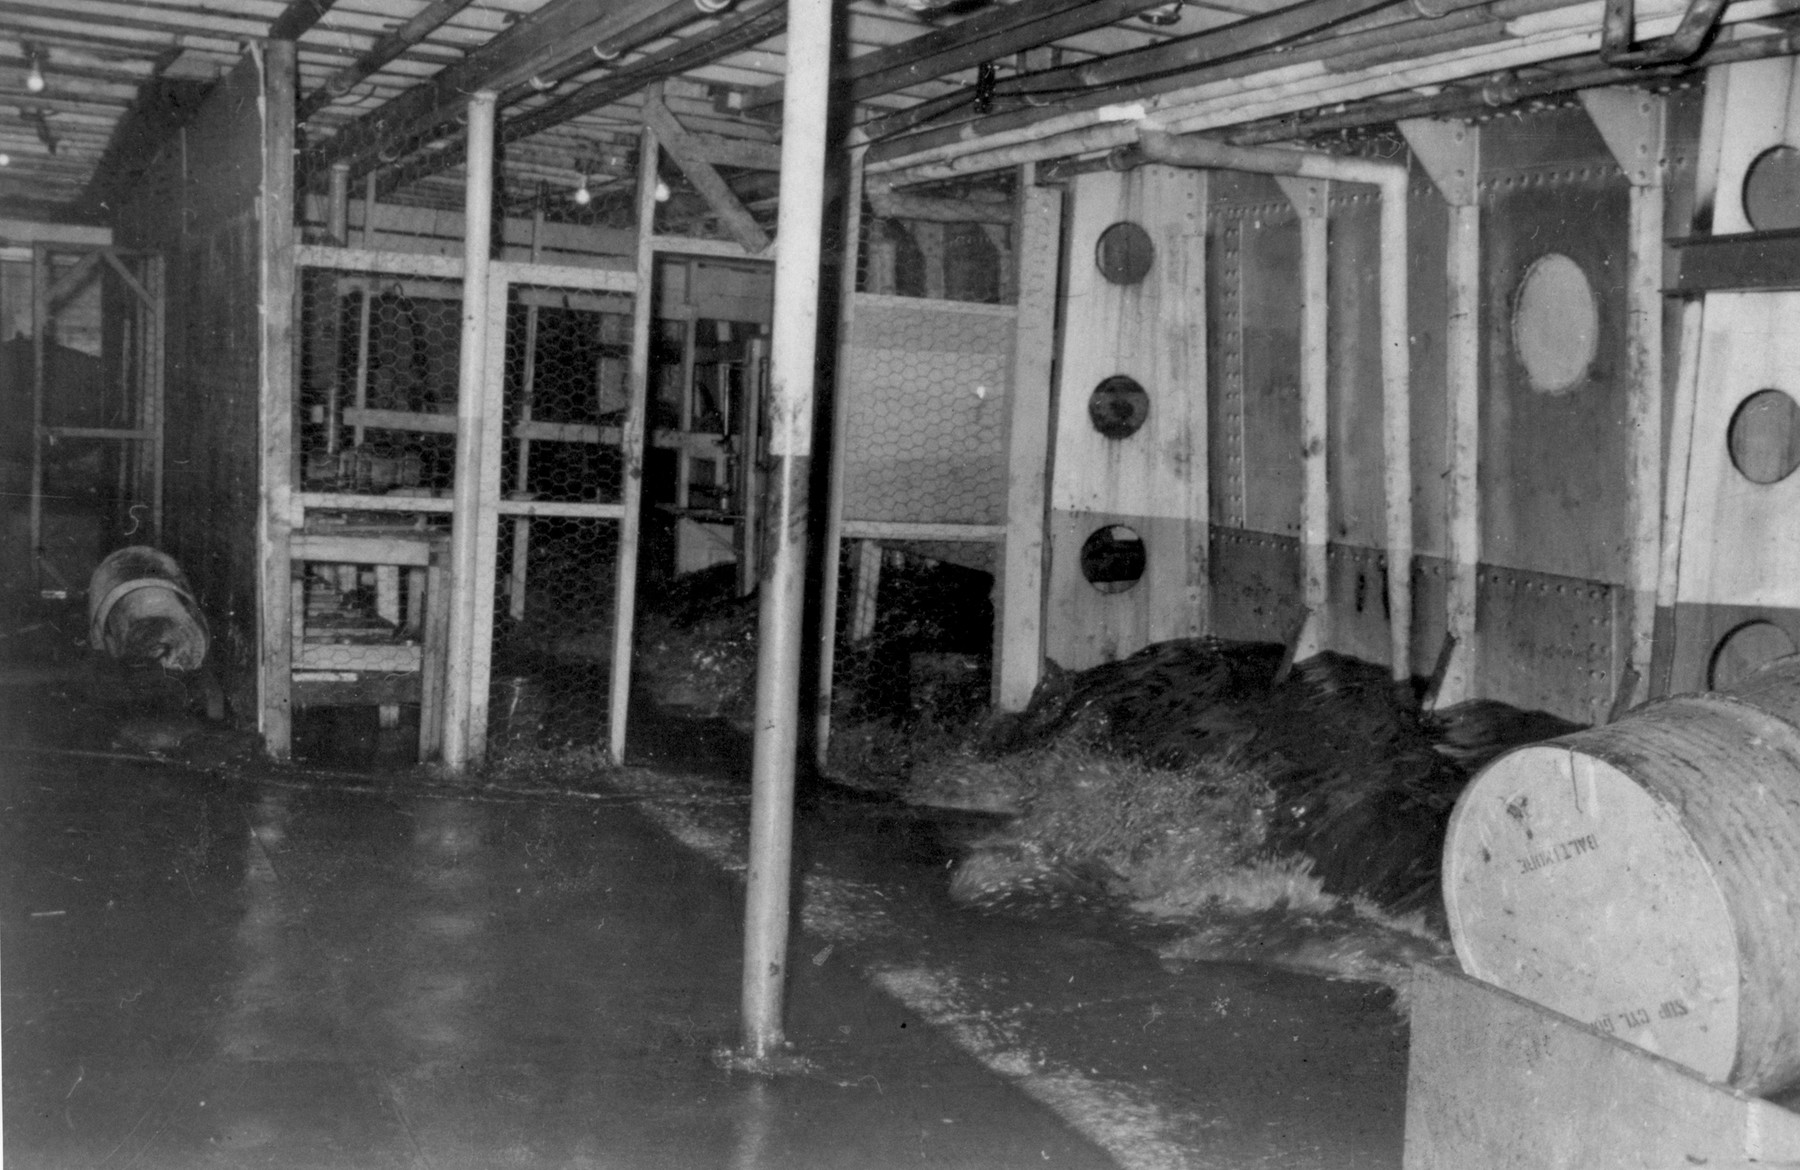 View of the flooded hold of the President Warfield after the gale that nearly sank the ship during its first attempt to cross the Atlantic Ocean.